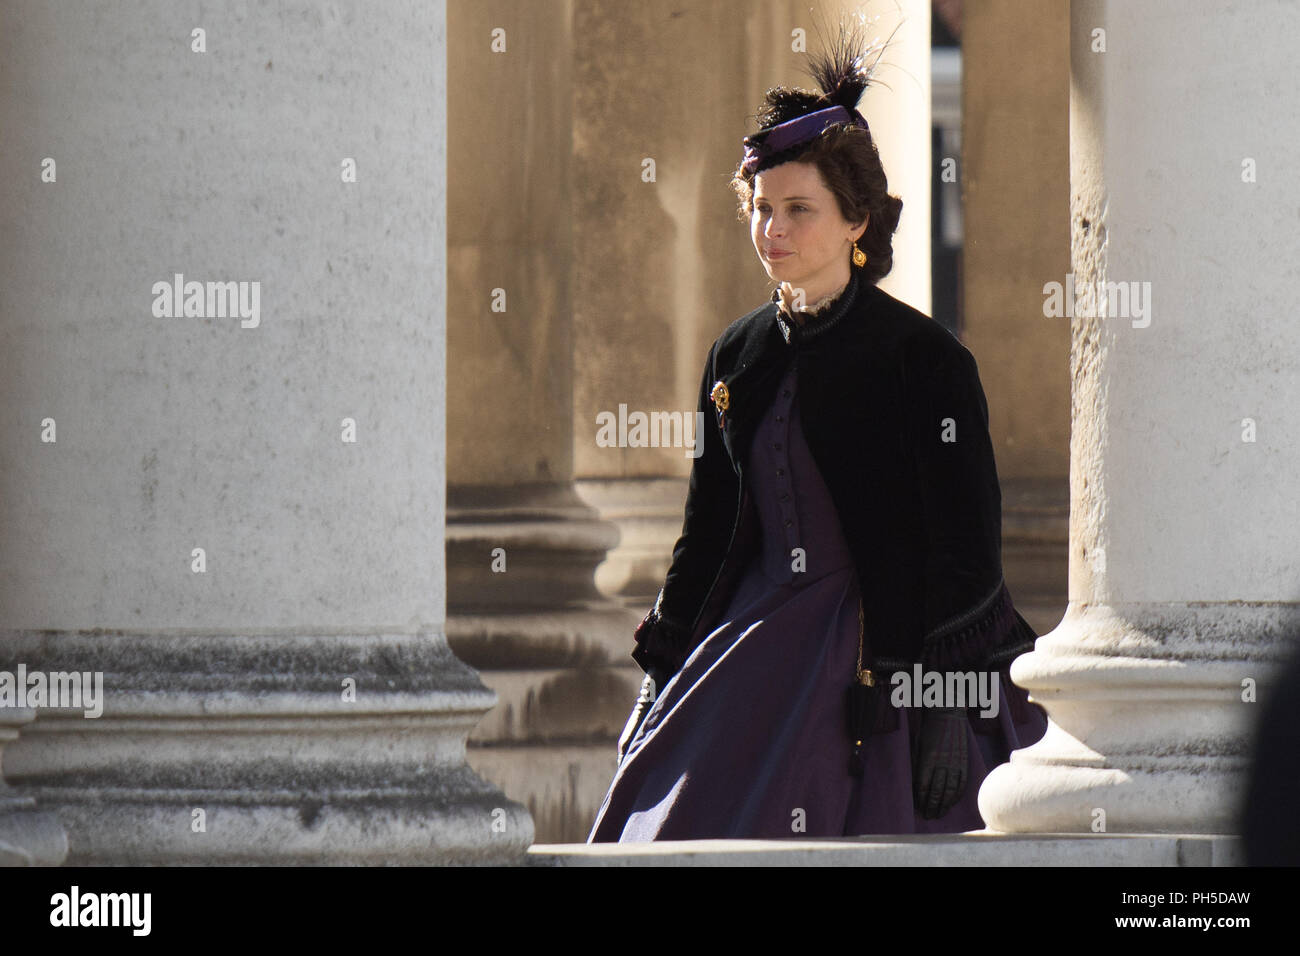 Felicity Jones Is Spotted On Set For Upcoming Movie The Aeronauts Scenes Were Filmed In The Colonnades At Greenwich Univeristy Featuring Felicity Jones Where Greenwich United Kingdom When 30 Jul 2018 Credit Wenncom PH5DAW 